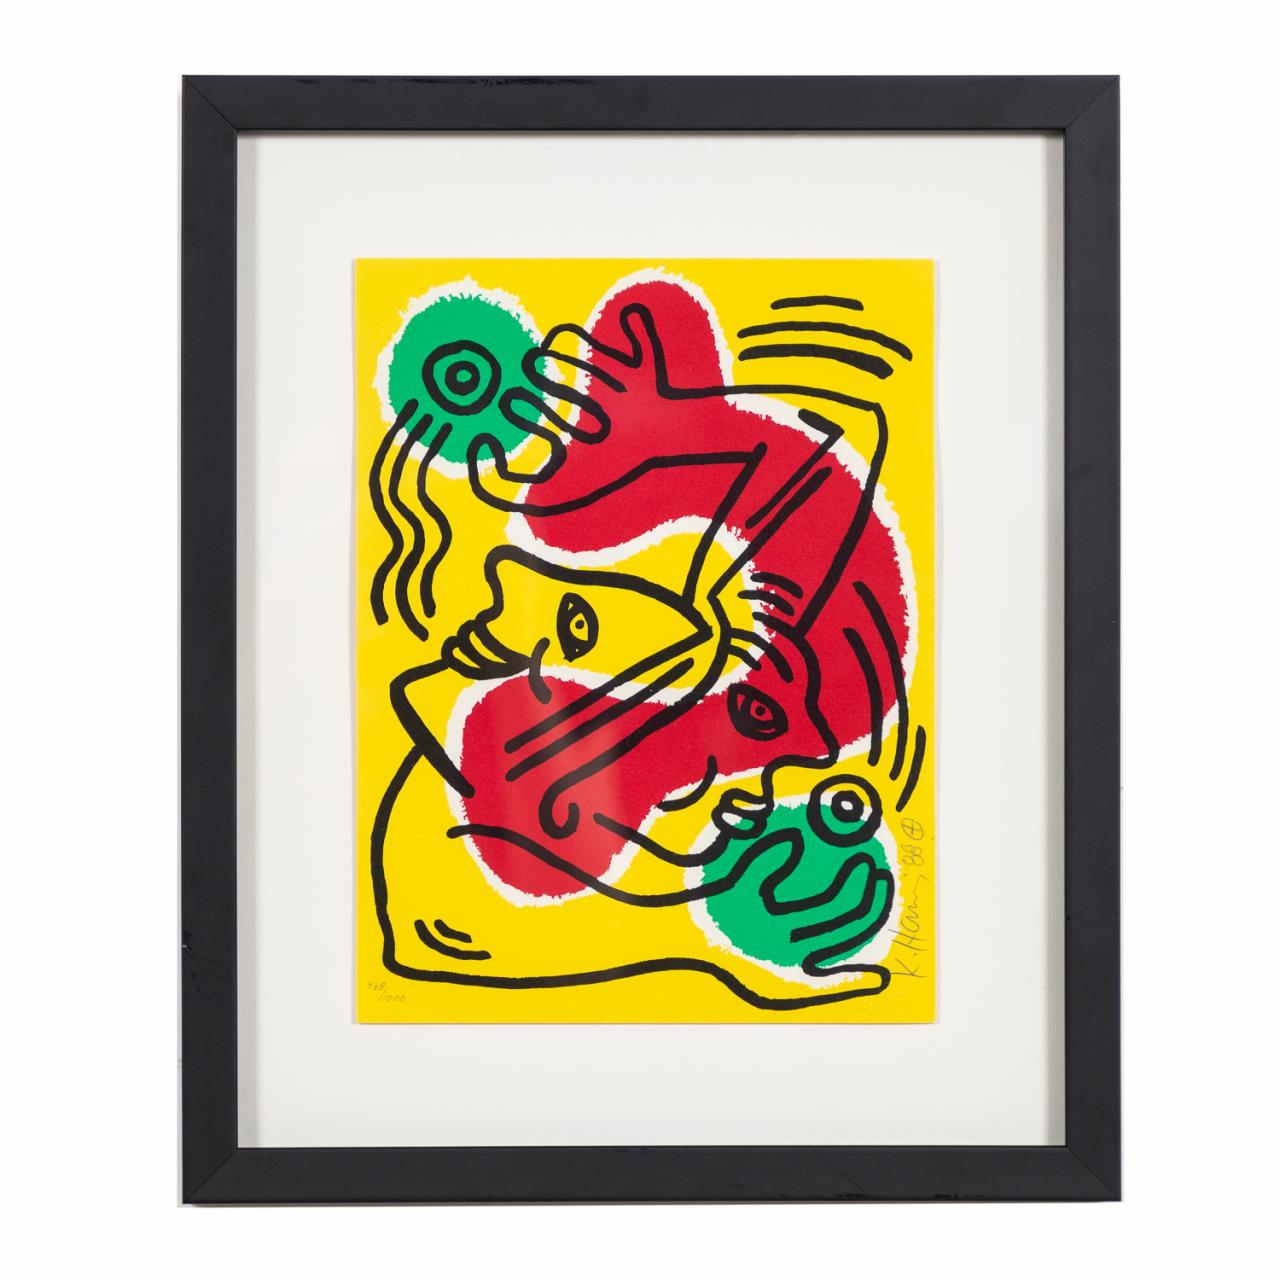 KEITH HARING POP ART LITHOGRAPH